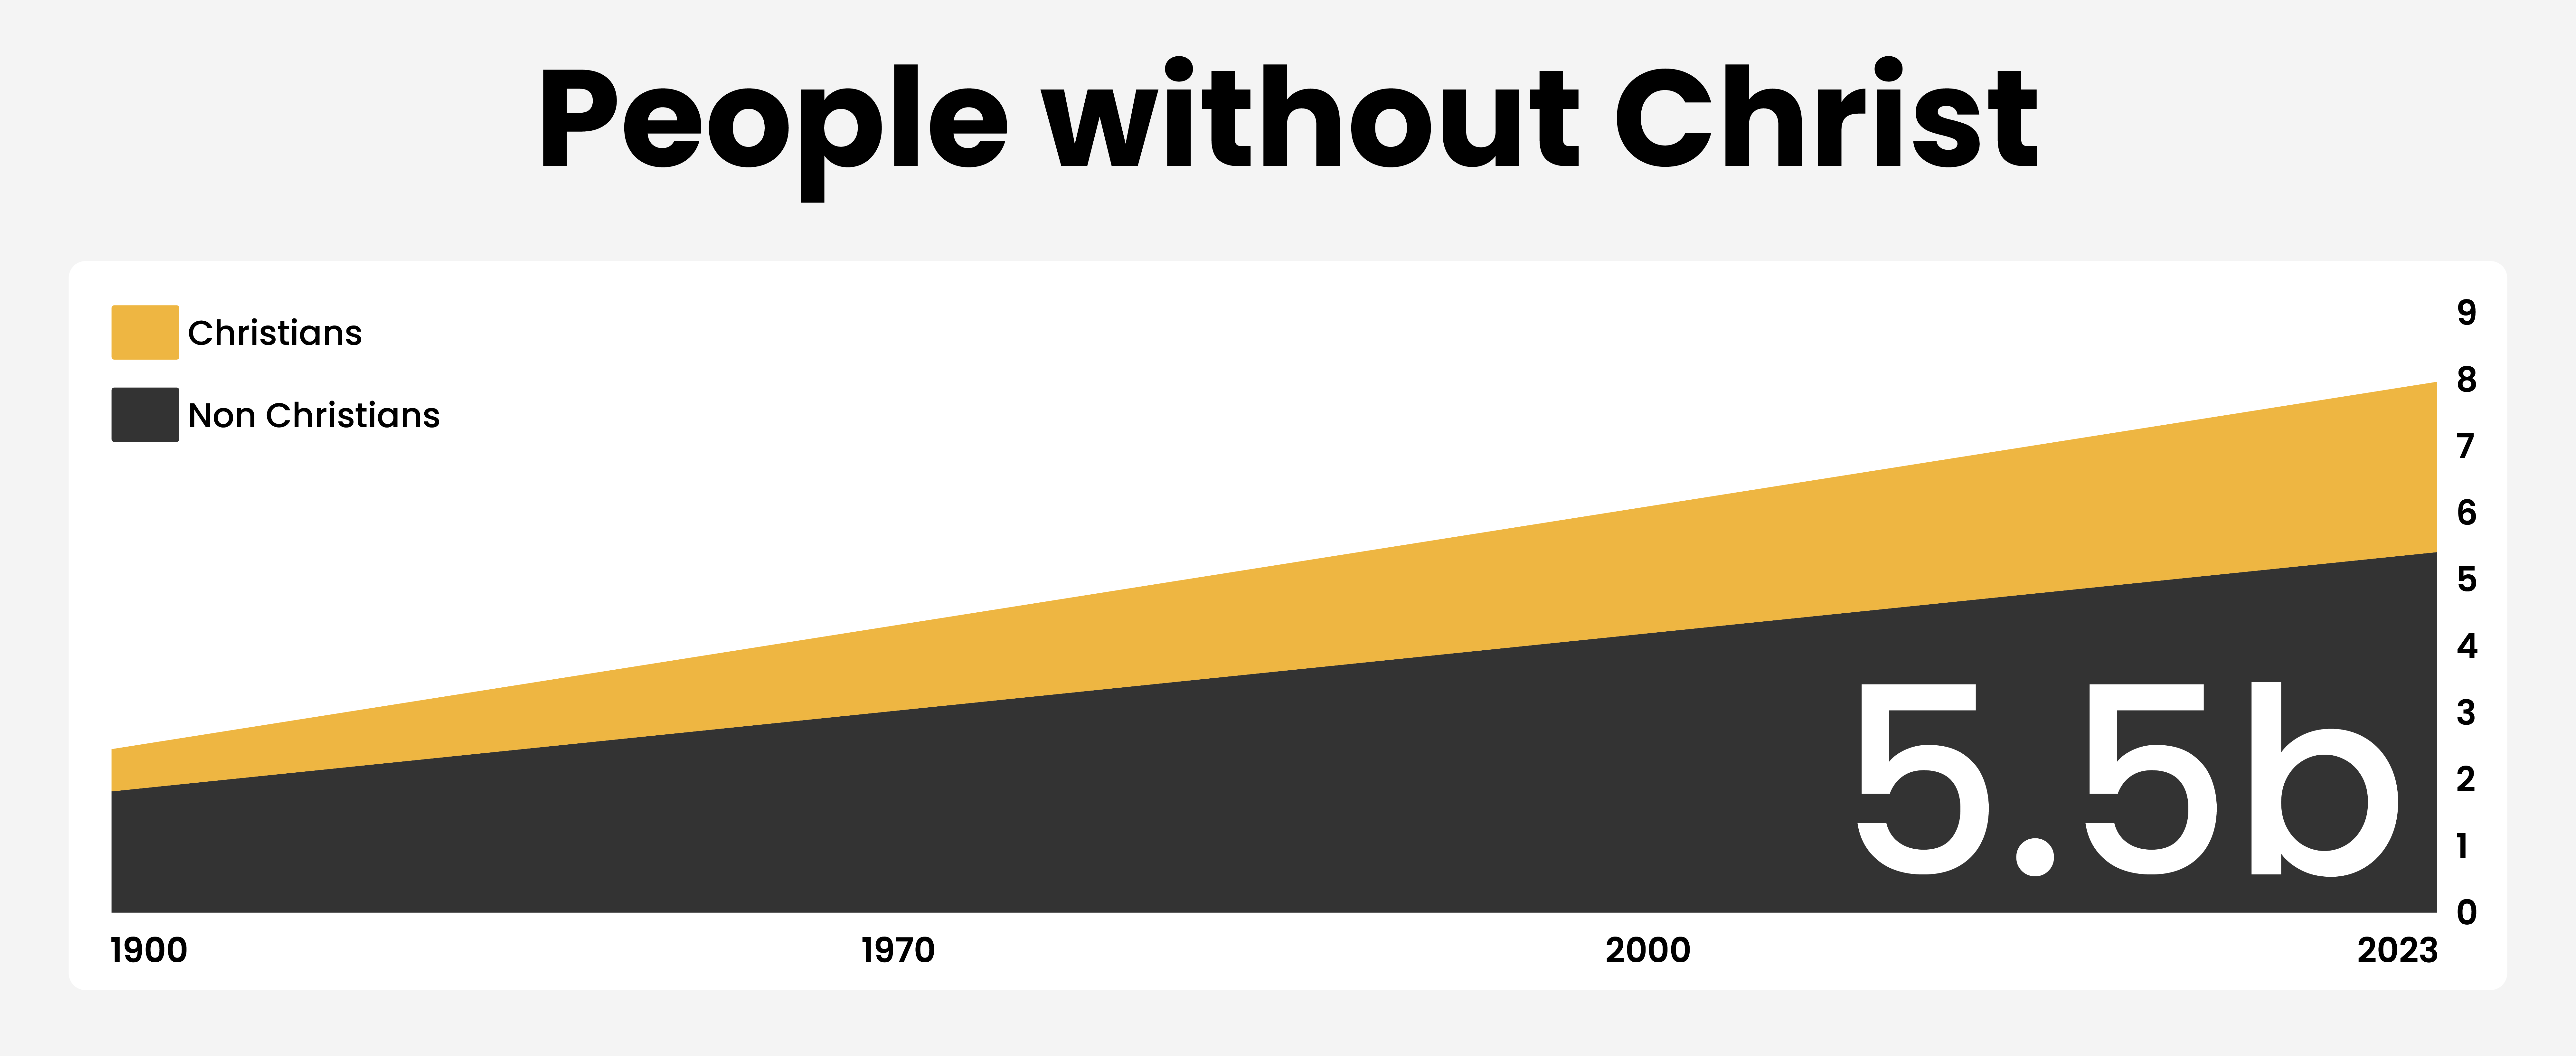 A graph of the number of people with and without Christ